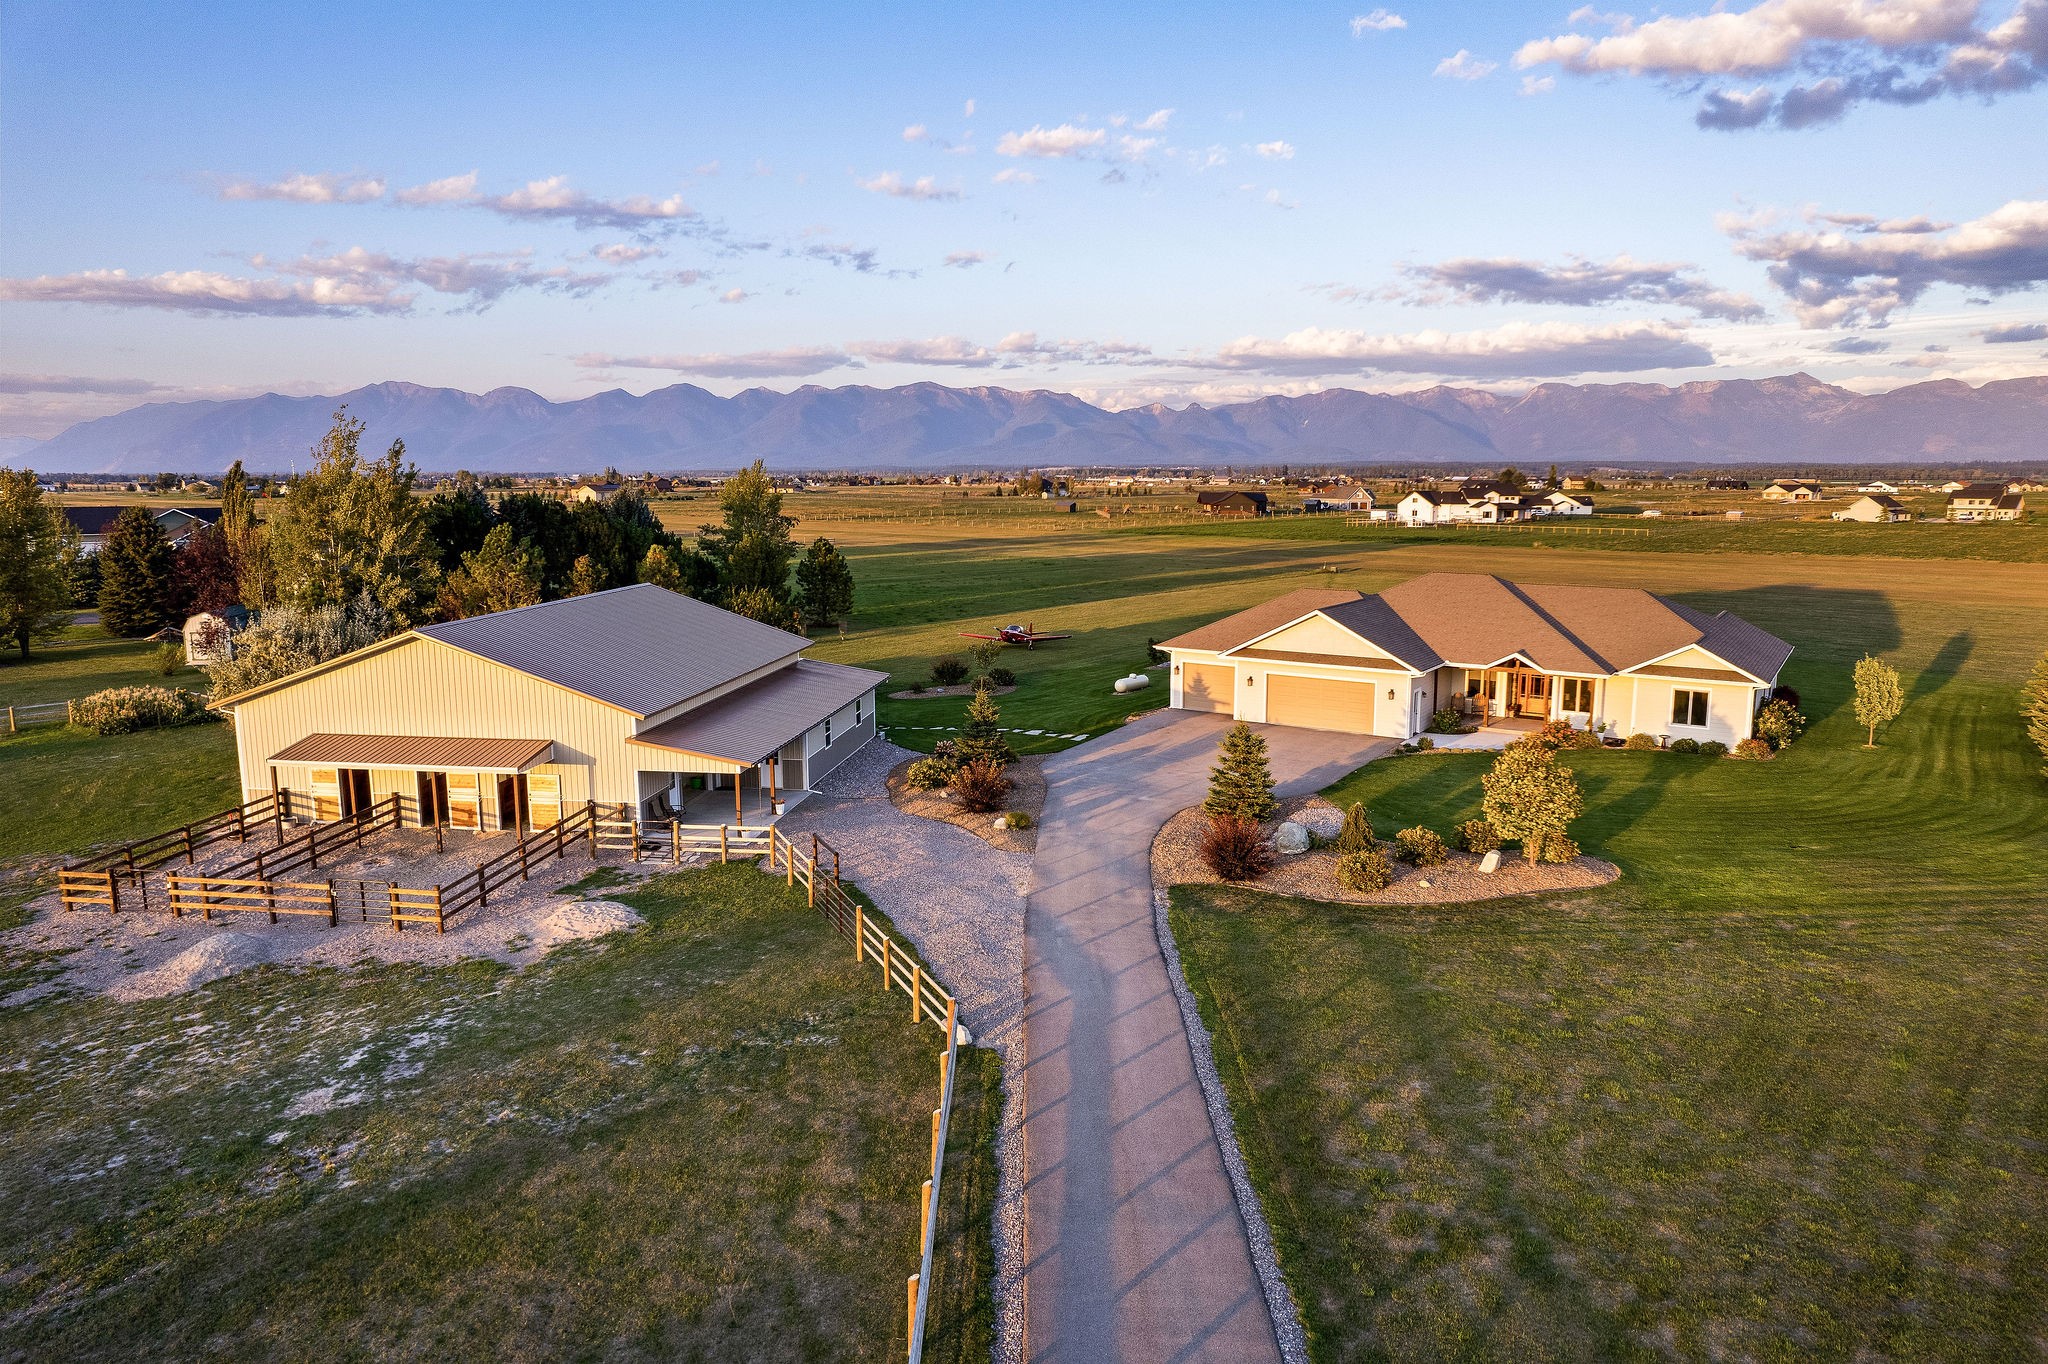 Rare and refined, custom built ranch home located in Lower Valley with incredible 360 degree views! Situated on 10 level acres between Sky Ranch's private airstrip and the protected Blasdel Waterfowl Production Area, this exceptional property is an aviator’s dream with a custom hangar and direct access to the runway. Additionally, this meticulously maintained ranch property offers an equestrian lifestyle with a beautiful 3-stall barn, paddocks, fenced pastures and amenities. The single level, 3 bed, 3 bath residence exudes quality and fine craftsmanship befitting the well thought out design that brings views in from every direction. Discerning buyers will appreciate the open floor plan, large master suite, second guest suite and top-notch finishes including hickory floors, custom built alder cabinetry and alder doors & trim. If you are looking for a versatile property that has fly in, fly out potential and panoramic views, this is it! Enter this property on a quarter mile fence-lined driveway and you’re greeted with a home built to take in the views.  Soaring ceilings and large windows feature spectacular, open views of the Swan and Mission mountain ranges to the East and Blacktail and the Cabinet Mountains to the West.  From Glacier National Park to Flathead Lake, sunrise to sunset, this home was built to take in the views!

In an elegant, neutral palette, the open floor plan of the home features Hickory flooring and a beautiful natural stone fireplace in the living room with custom mantle. The cabinetry and trim are all custom built in Alder with soft-close drawers. The kitchen is appointed with stainless steel appliances and large, curved island and opens to the dining area as well as the screened-in patio for seamless indoor and outdoor entertaining.

The primary bedroom features beautiful views, large windows and sitting area, as well as a walk in closet with built-ins.  The spa-like bath features abundant cabinetry, modern glass shower and soaking tub.  The large secondary bedrooms also have beautiful views, and one features an ensuite bath with walk-in closet.  This thoughtfully and stylishly designed home also features a home office with French doors, laundry room with plenty of cabinetry and countertops and a bonus room that can be used as a hobby room, art studio, or home gym. 

The lighted and thoughtfully finished garage is oversized with built-in storage cabinets and hot/cold water.  The third garage bay is finished and heated and is ideal for a shop or woodworking.

The unique and custom-built hangar features a 40-foot bi-fold door, LED lighting and large concrete ramp with tie-downs which opens up toward the Sky Ranch runway. Although shared in the same 3000 sq. ft. building, the hangar is entirely separate from the beautiful 3-stall barn and paddocks.  The barn features a covered patio with separate entry, hay and feed storage, custom stall hardware by Noble Equestrian, tongue and groove finishes, tack room and roll-up garage doors for easy access, feed delivery, or trailer storage.  

Frost-free water hydrants on both sides of the barn, and in the interior provide year-round ease of maintenance for animals.  Thoughtful planning and high-quality construction define barn, paddocks, and approximately 6 acres of fenced pastures with loafing shed, gates and easy access in and out for trucks, trailers and farm equipment without having to use the paved driveway.

The incredibly maintained, professionally landscaped yard features plants that alternately bloom all season long and extensive use of crushed rock, river rock and flagstone.  The fenced garden is an organic gardener’s haven and provides the ultimate in farm-to-table lifestyle.

This is a rare and unique opportunity for the most discerning buyer looking for a fly-in ranch property with exceptional views.